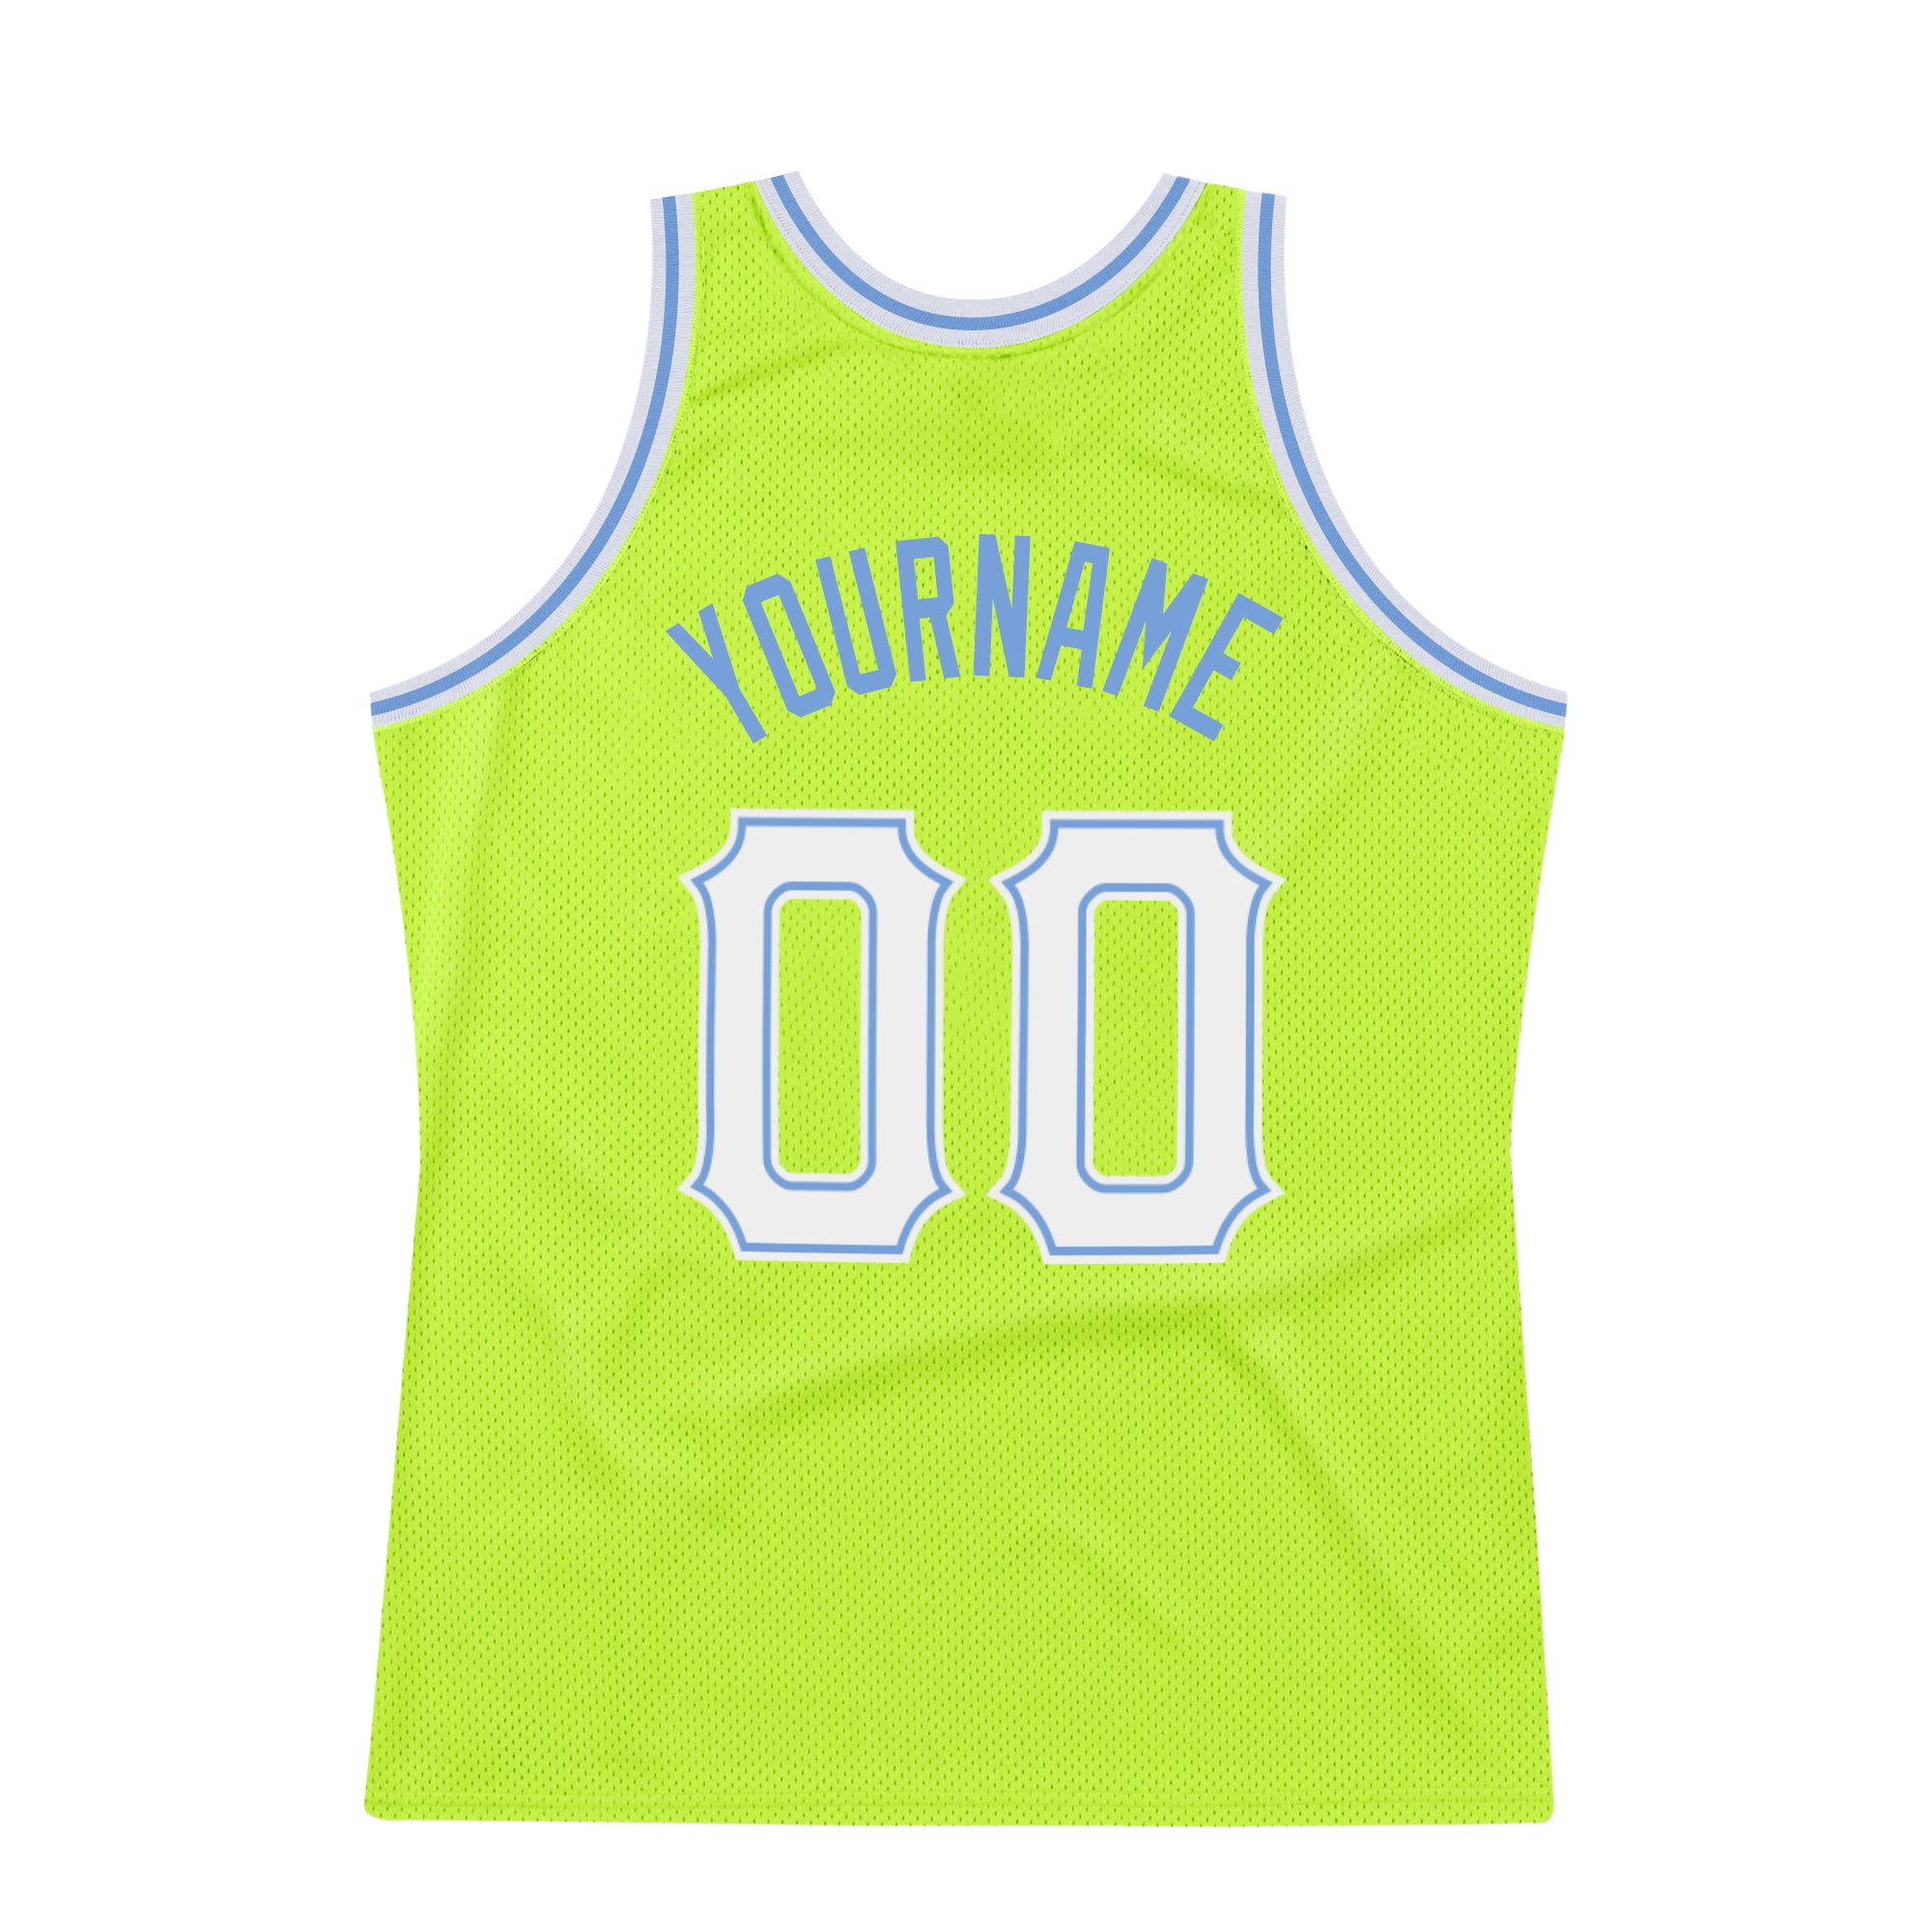 Custom Gray Light Blue-White Authentic Throwback Basketball Jersey Discount